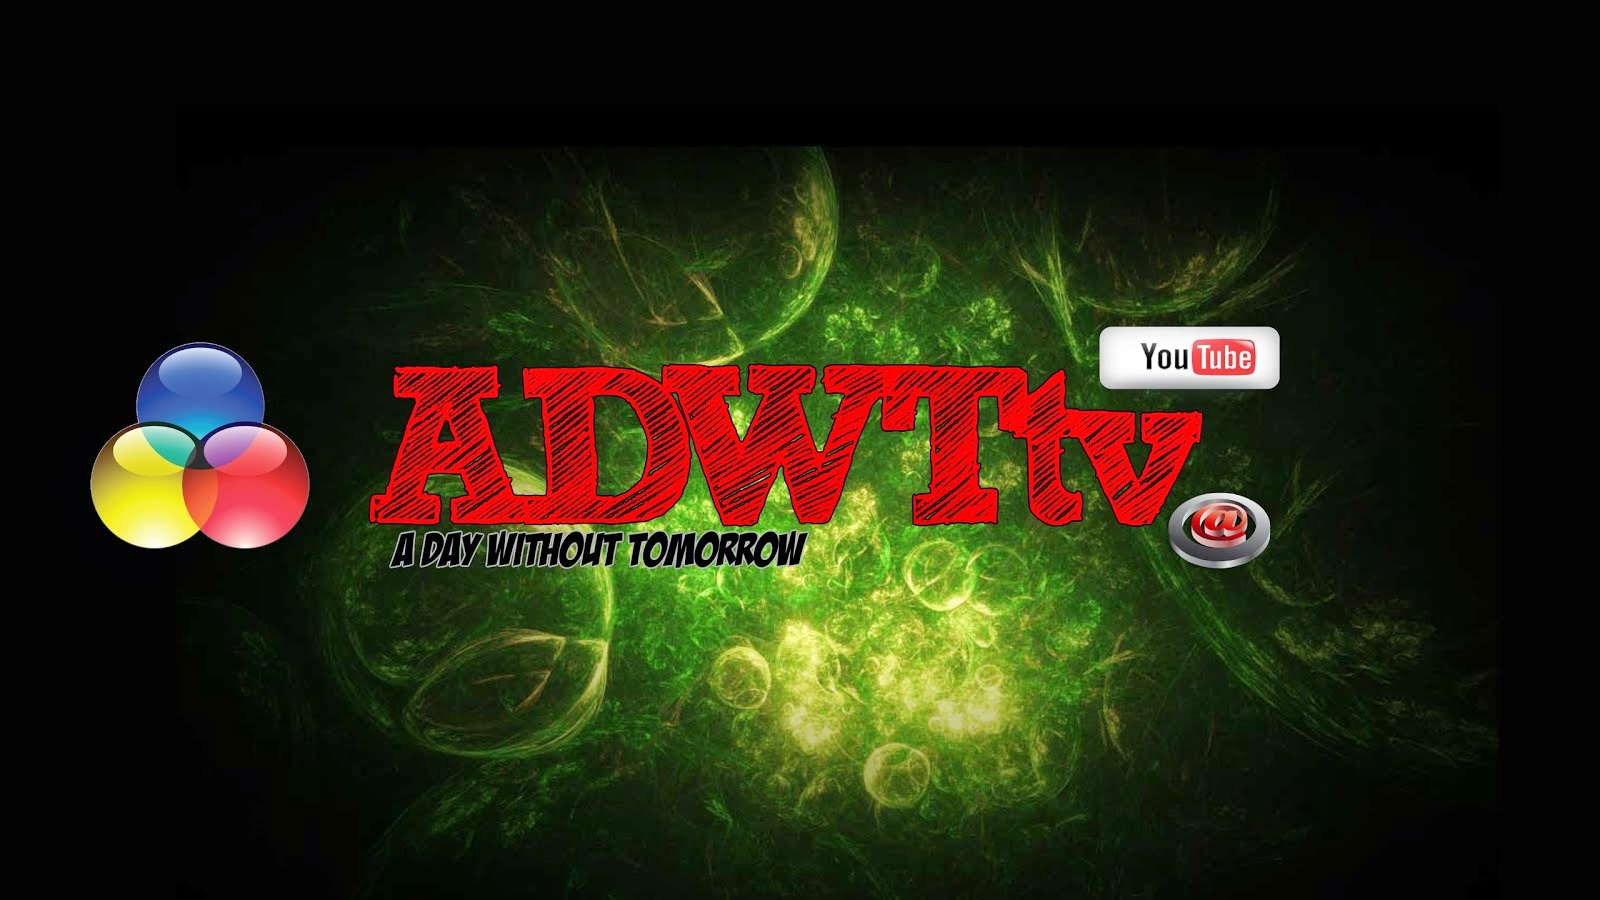 Official ADWTtv Channel YouTube